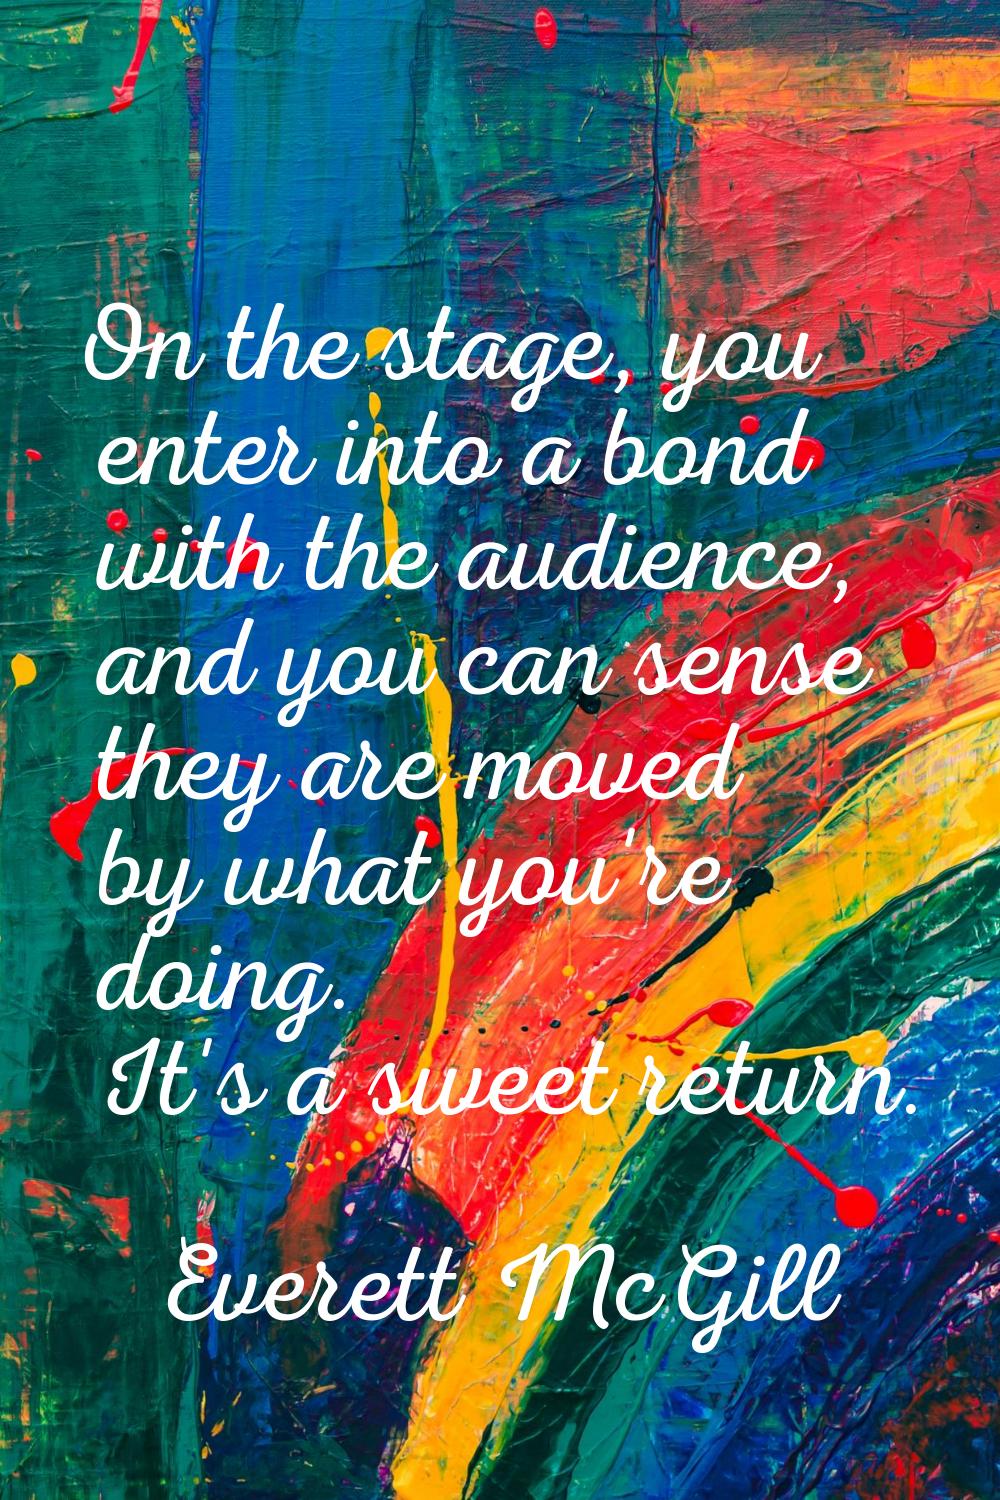 On the stage, you enter into a bond with the audience, and you can sense they are moved by what you